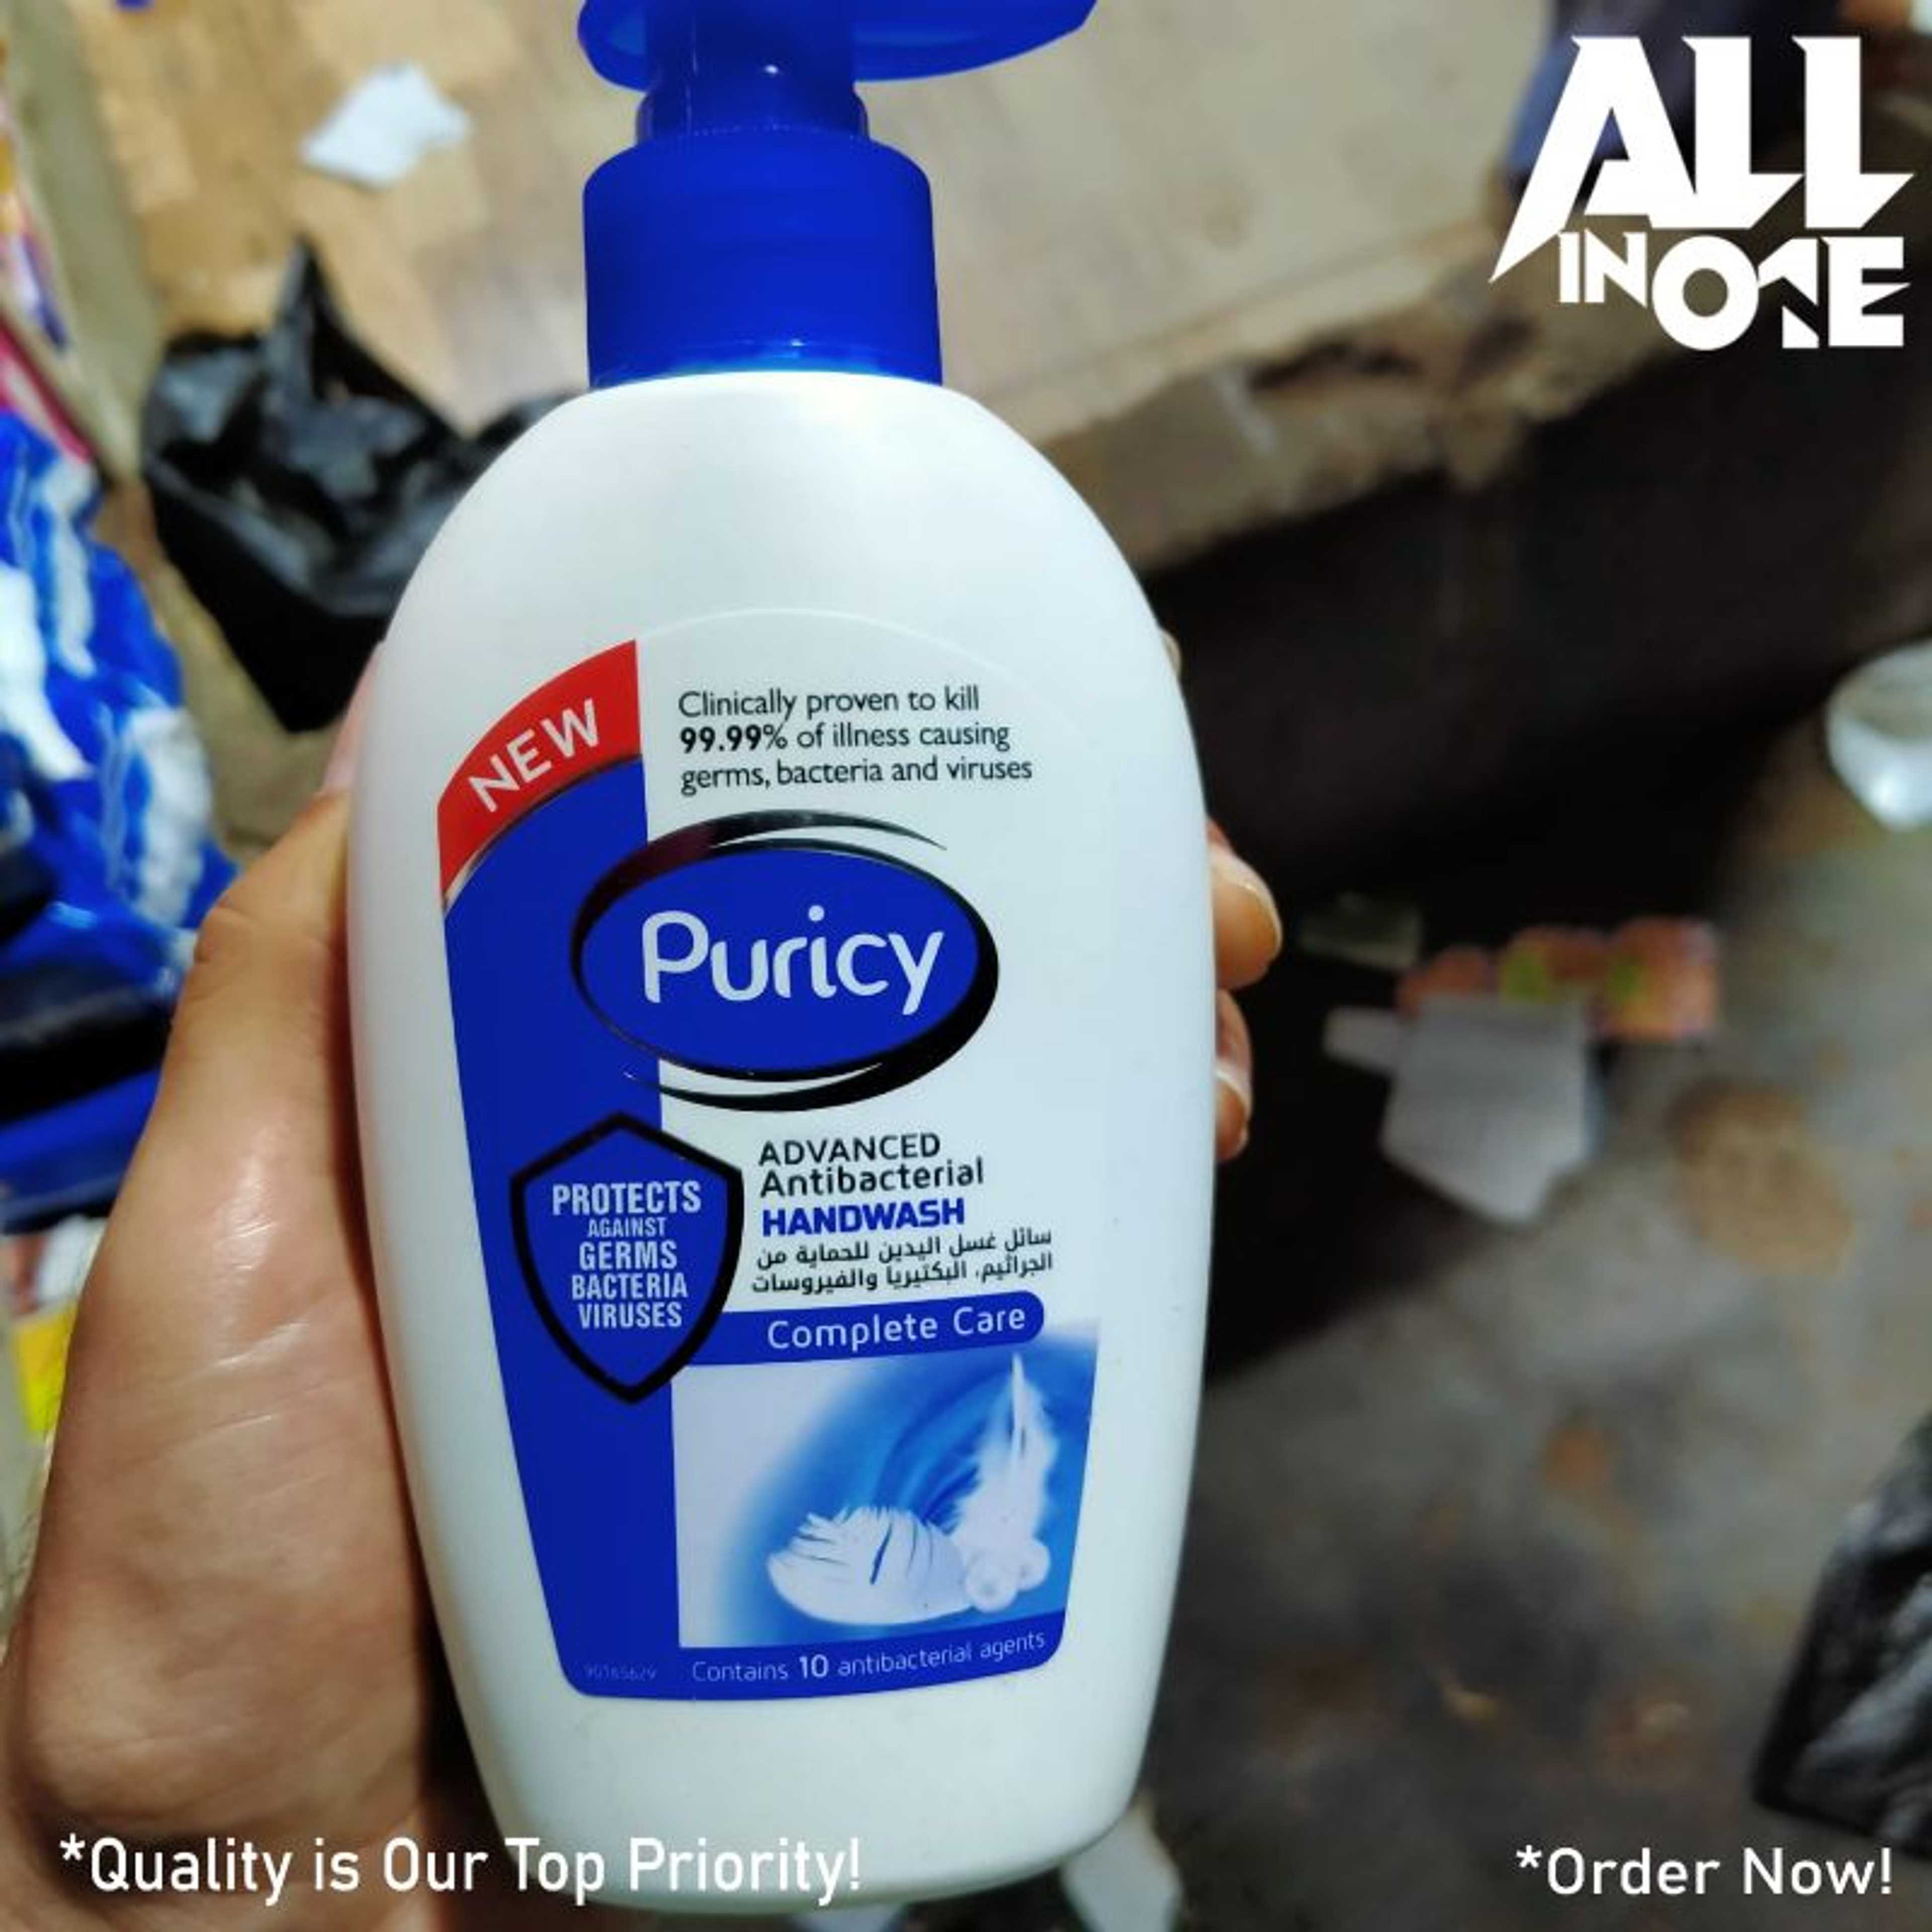 Puricy Advanced Complete Care Anti-Bacterial Hand Wash